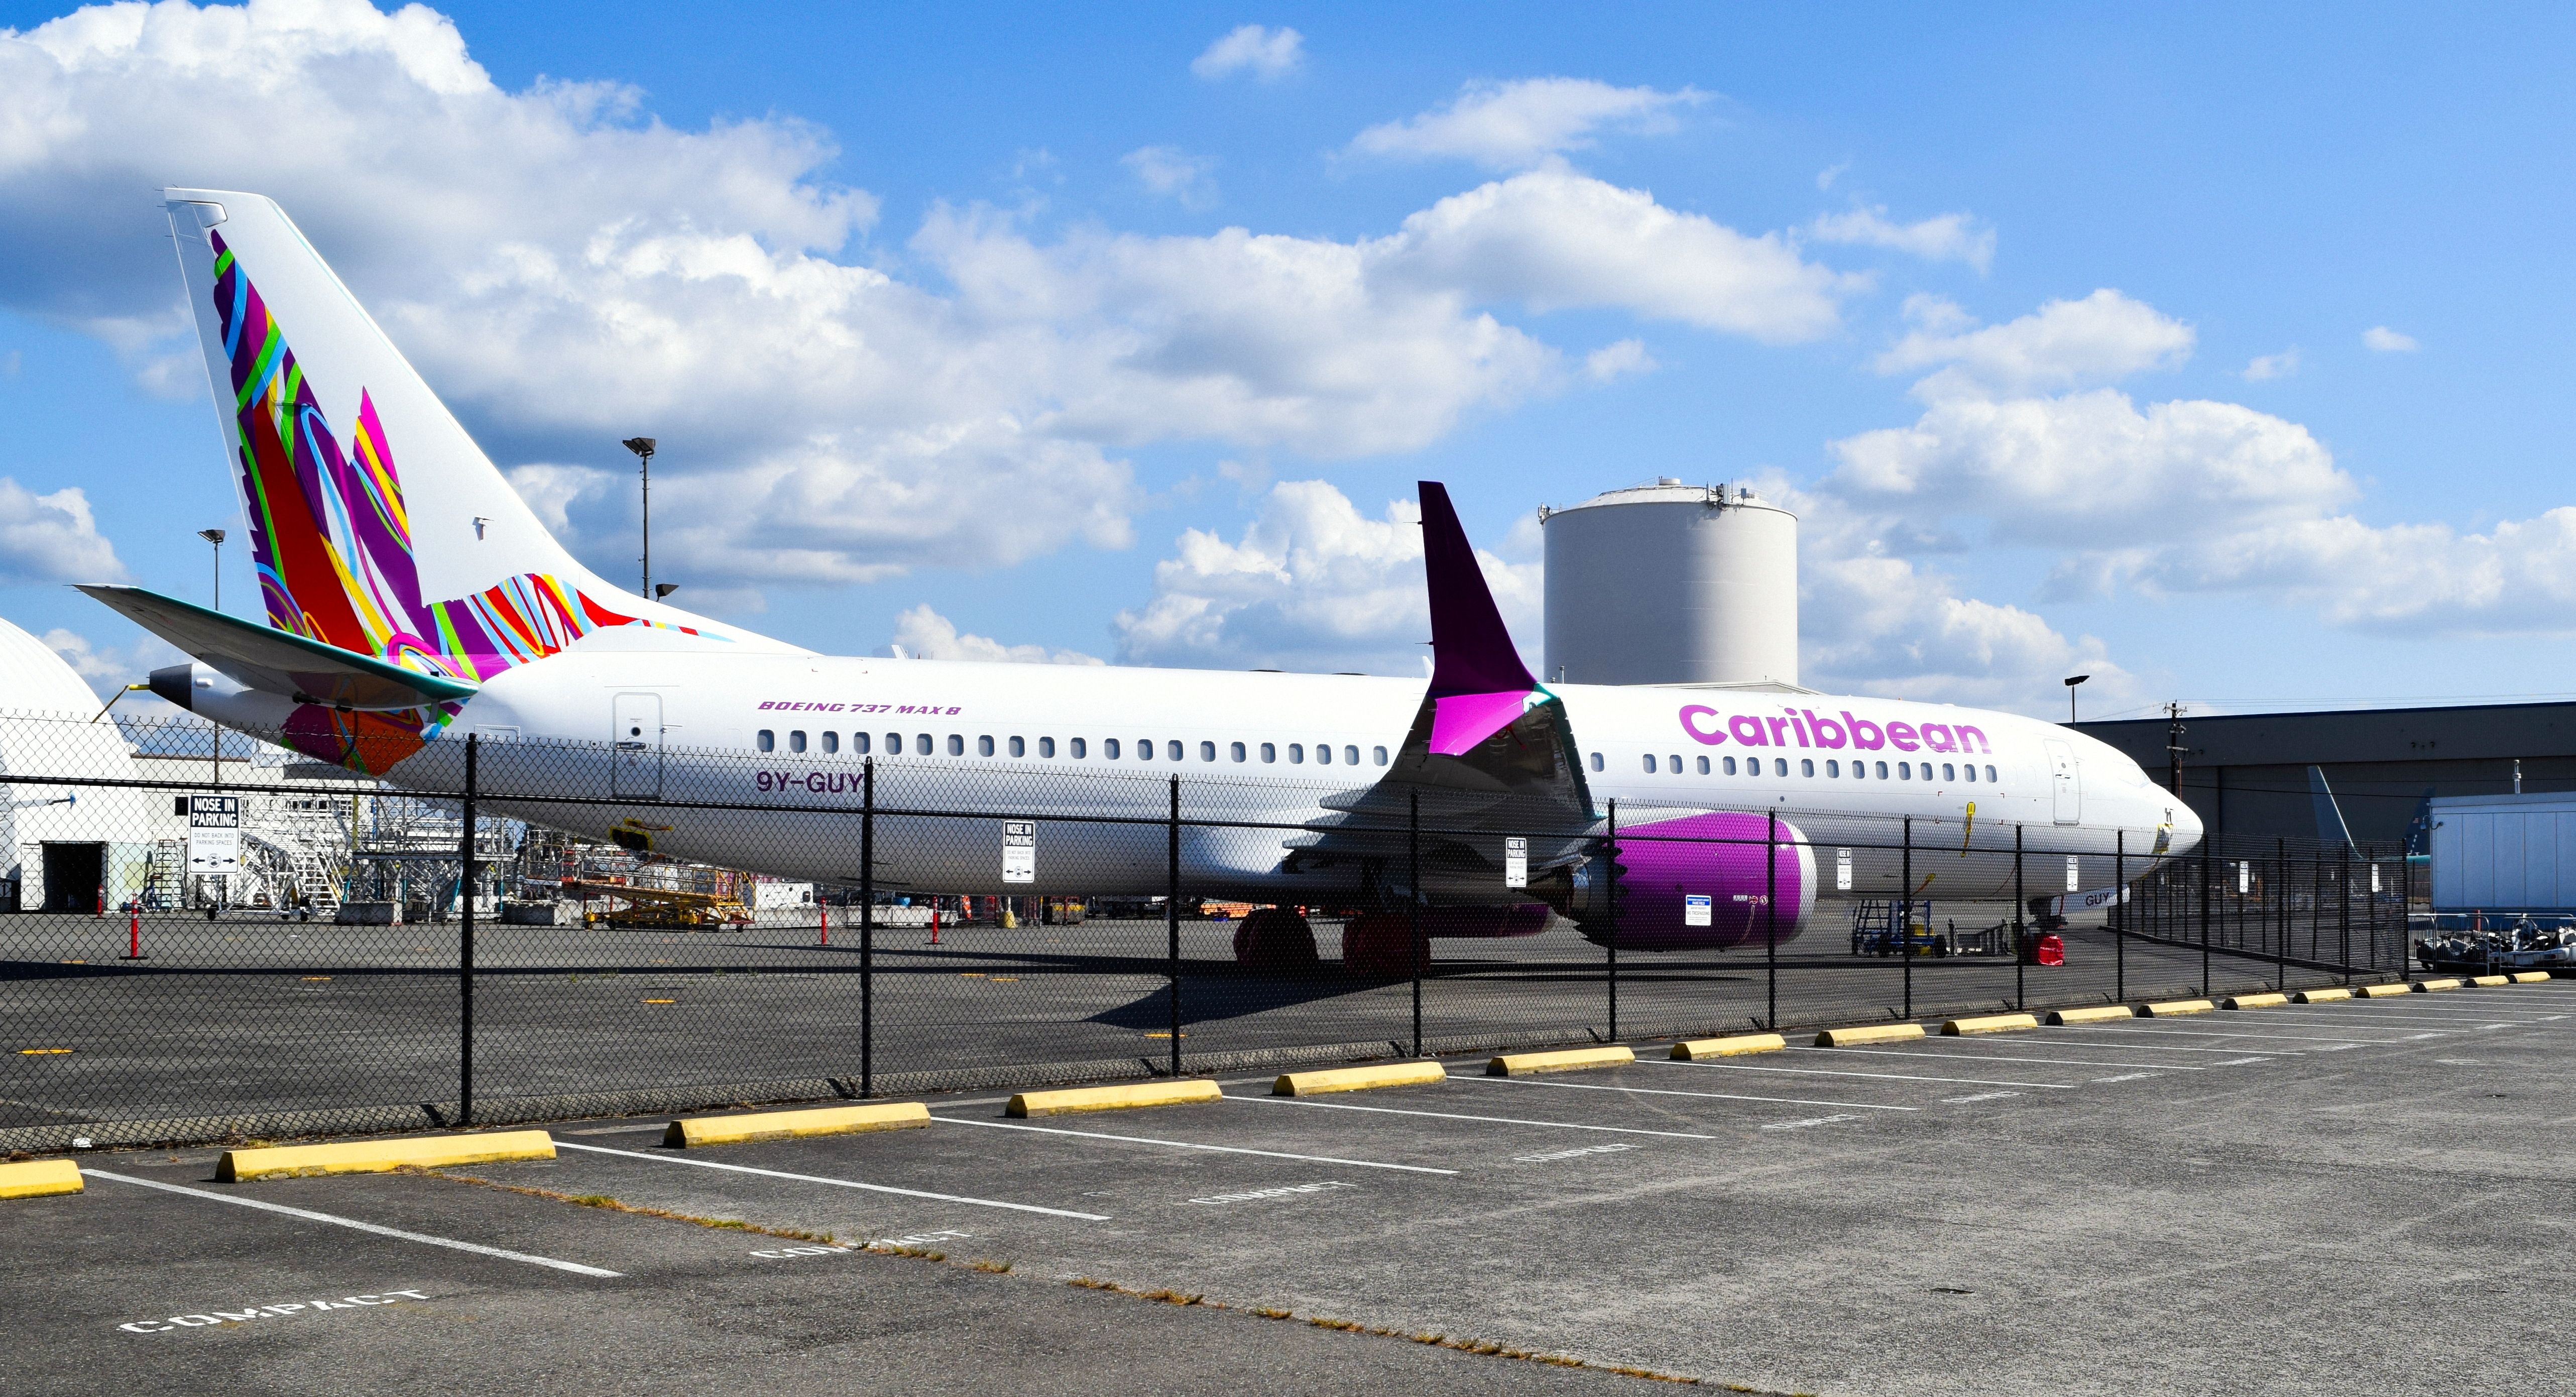 Caribbean Airlines Boeing 737 MAX